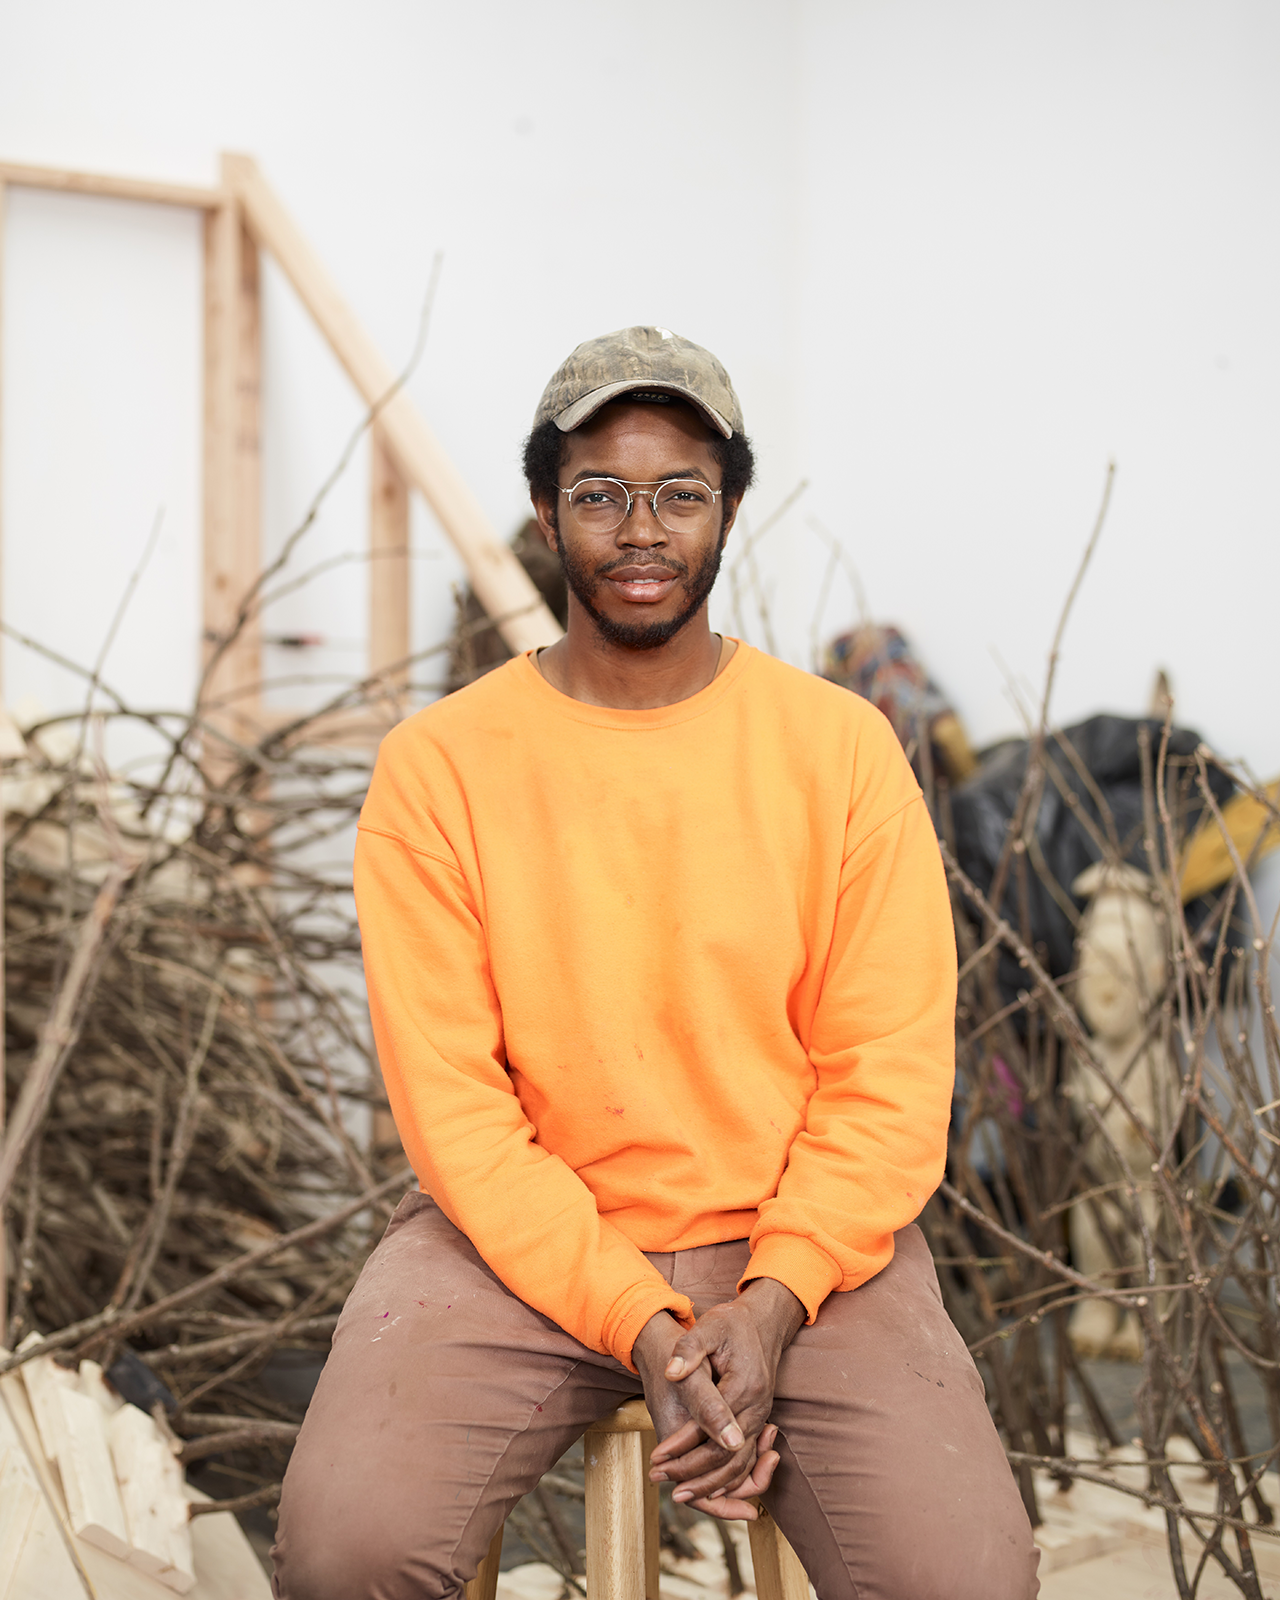 A candid portrait of an artist, Hugh Hayden, seated on a wooden stool. He wears an eye-catching orange sweatshirt and brown trousers, with a camouflage cap perched atop his head. His hands are clasped in front of him, and he sports glasses with a thin frame. Behind him, a studio setting is visible, filled with an array of natural and constructed wooden forms that create a sense of creative chaos. His expression is serene and contemplative, suggesting a quiet confidence